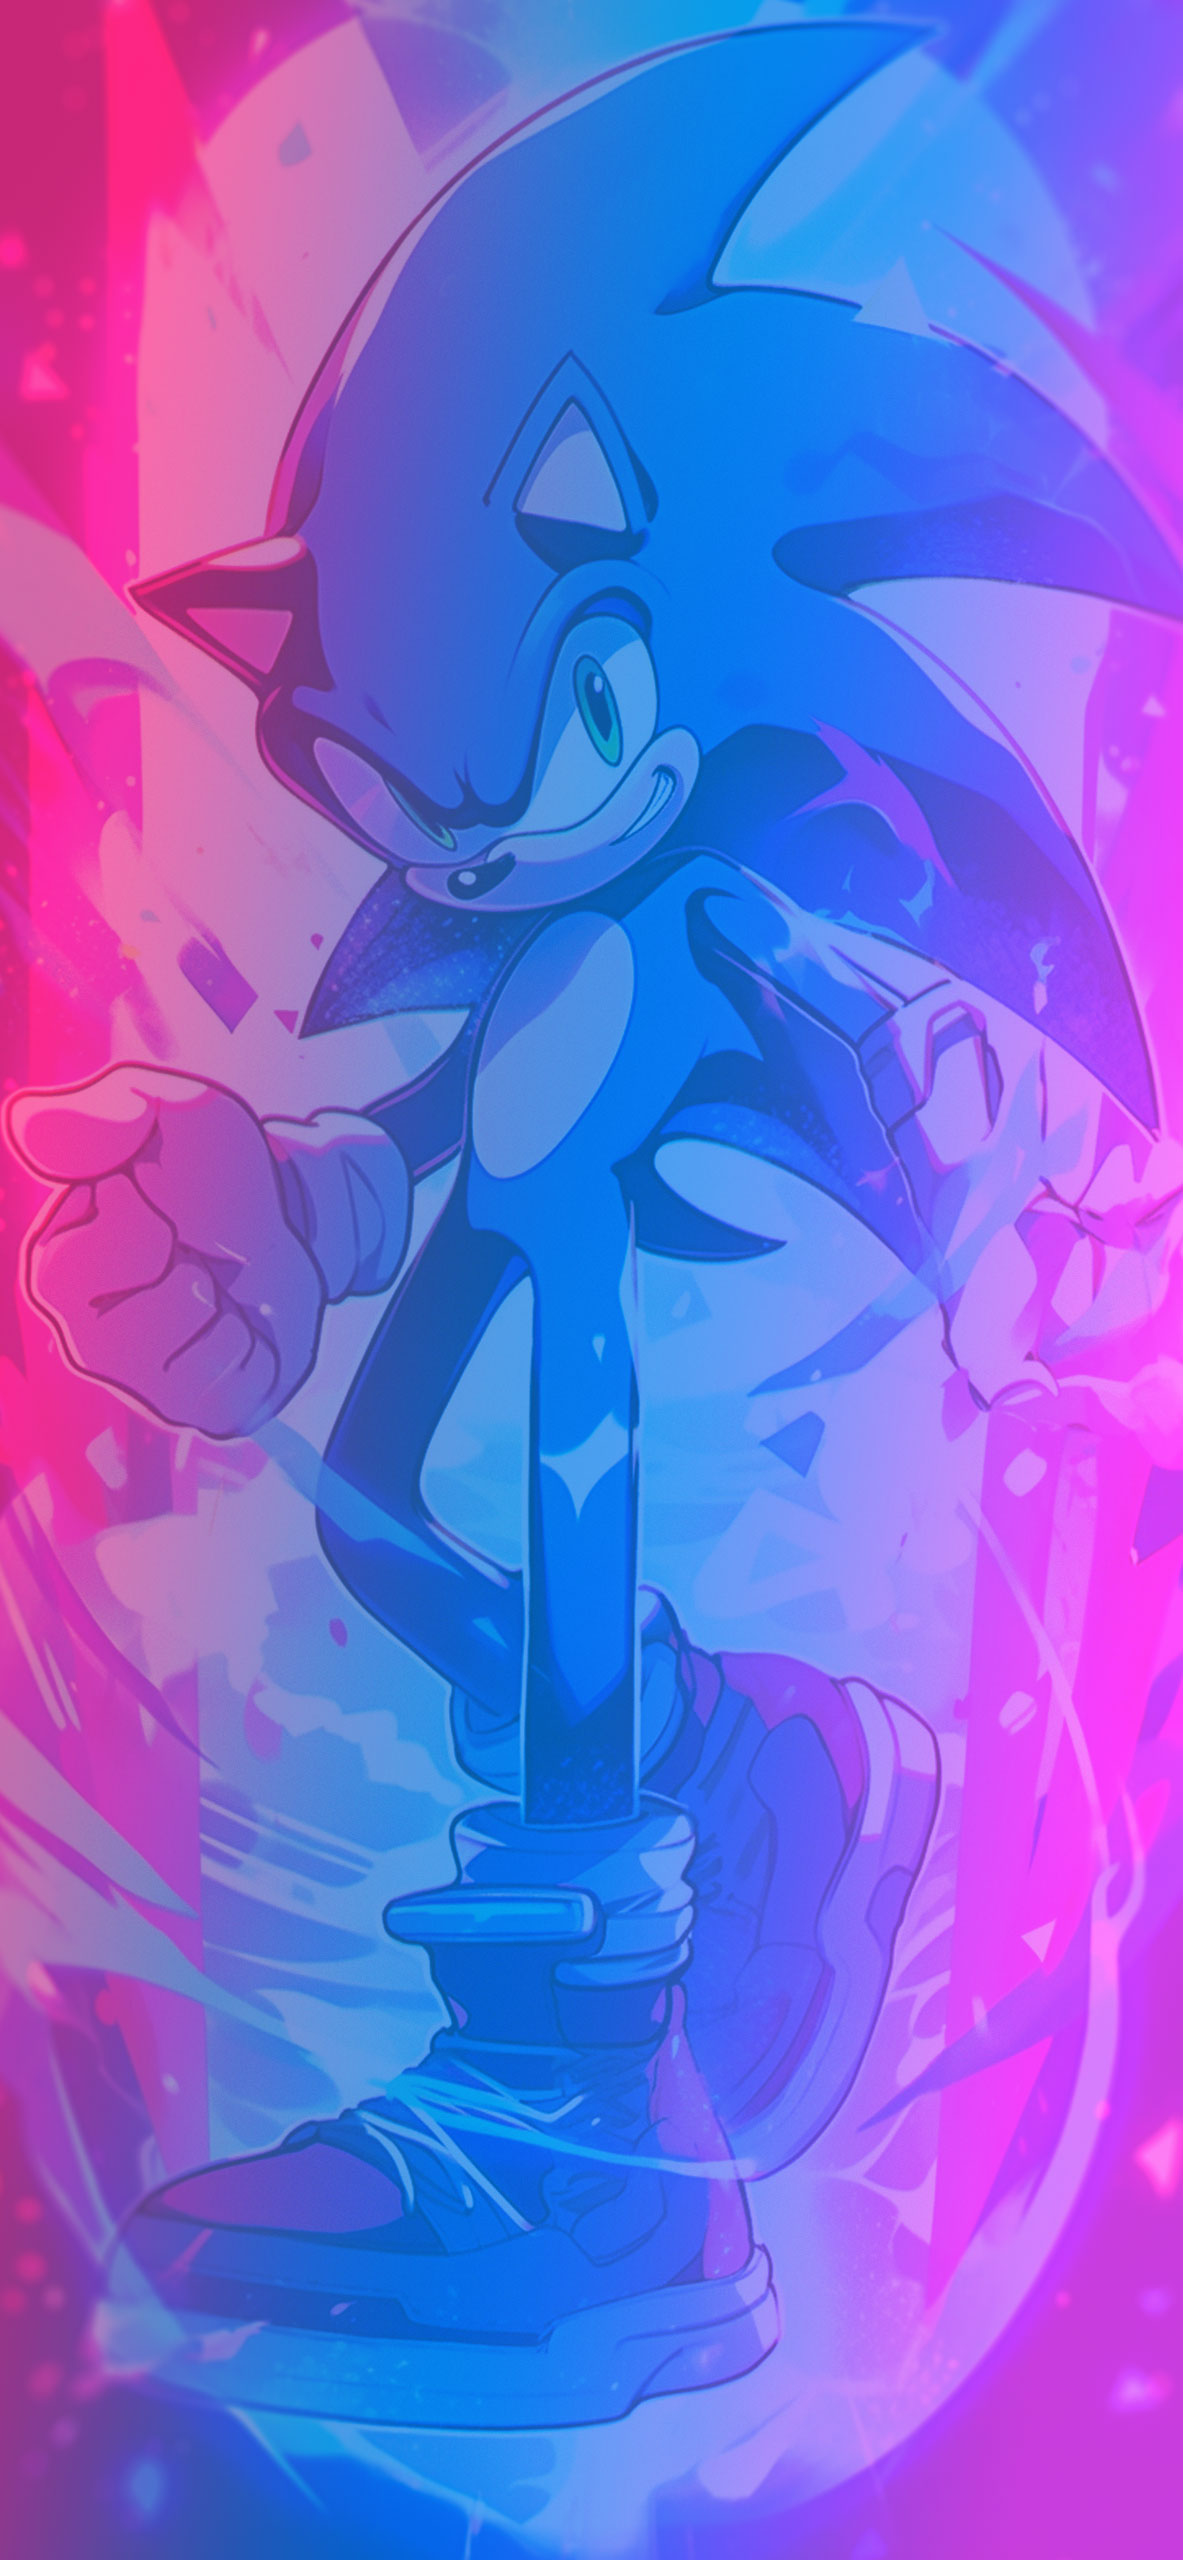 Sonic The Hedgehog Space Wallpaper 4K by Mauritaly on DeviantArt